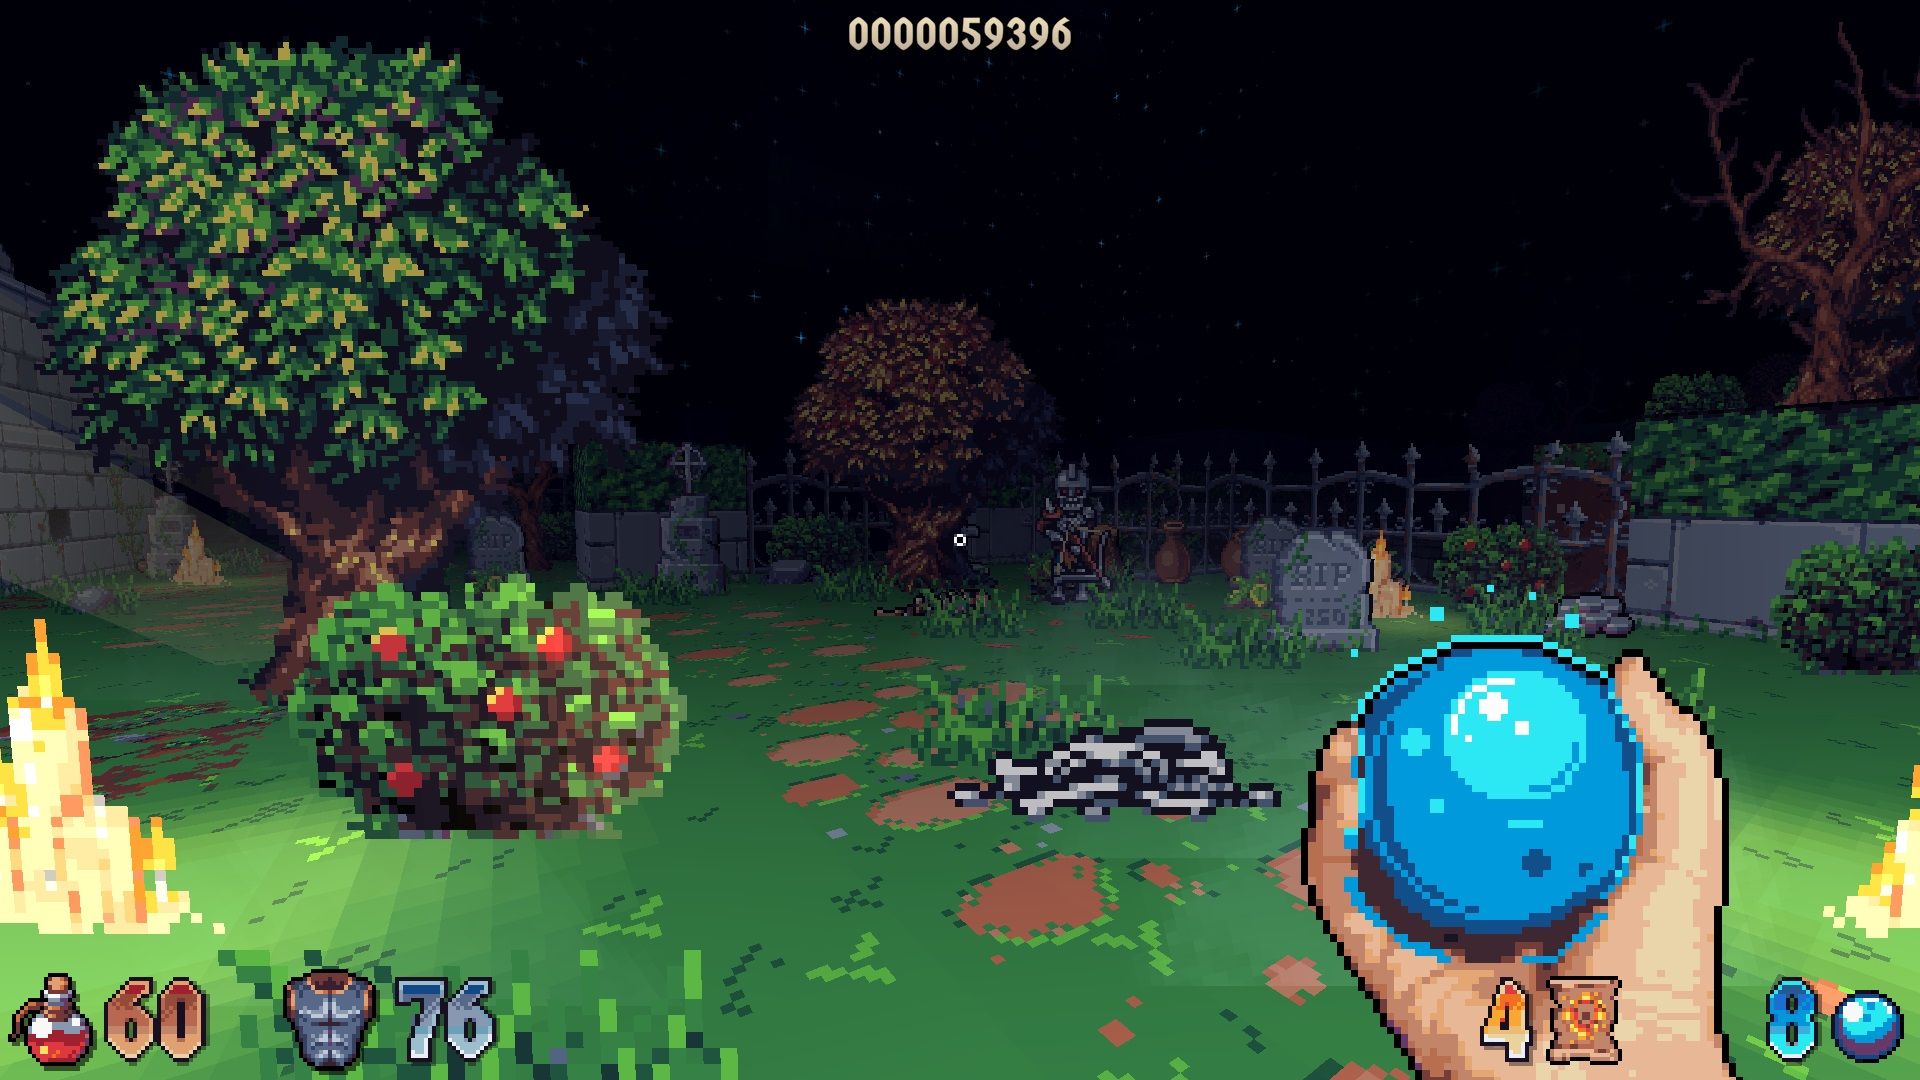 A cemetary-themed Wizordum level at night with the player holding a blue orb.